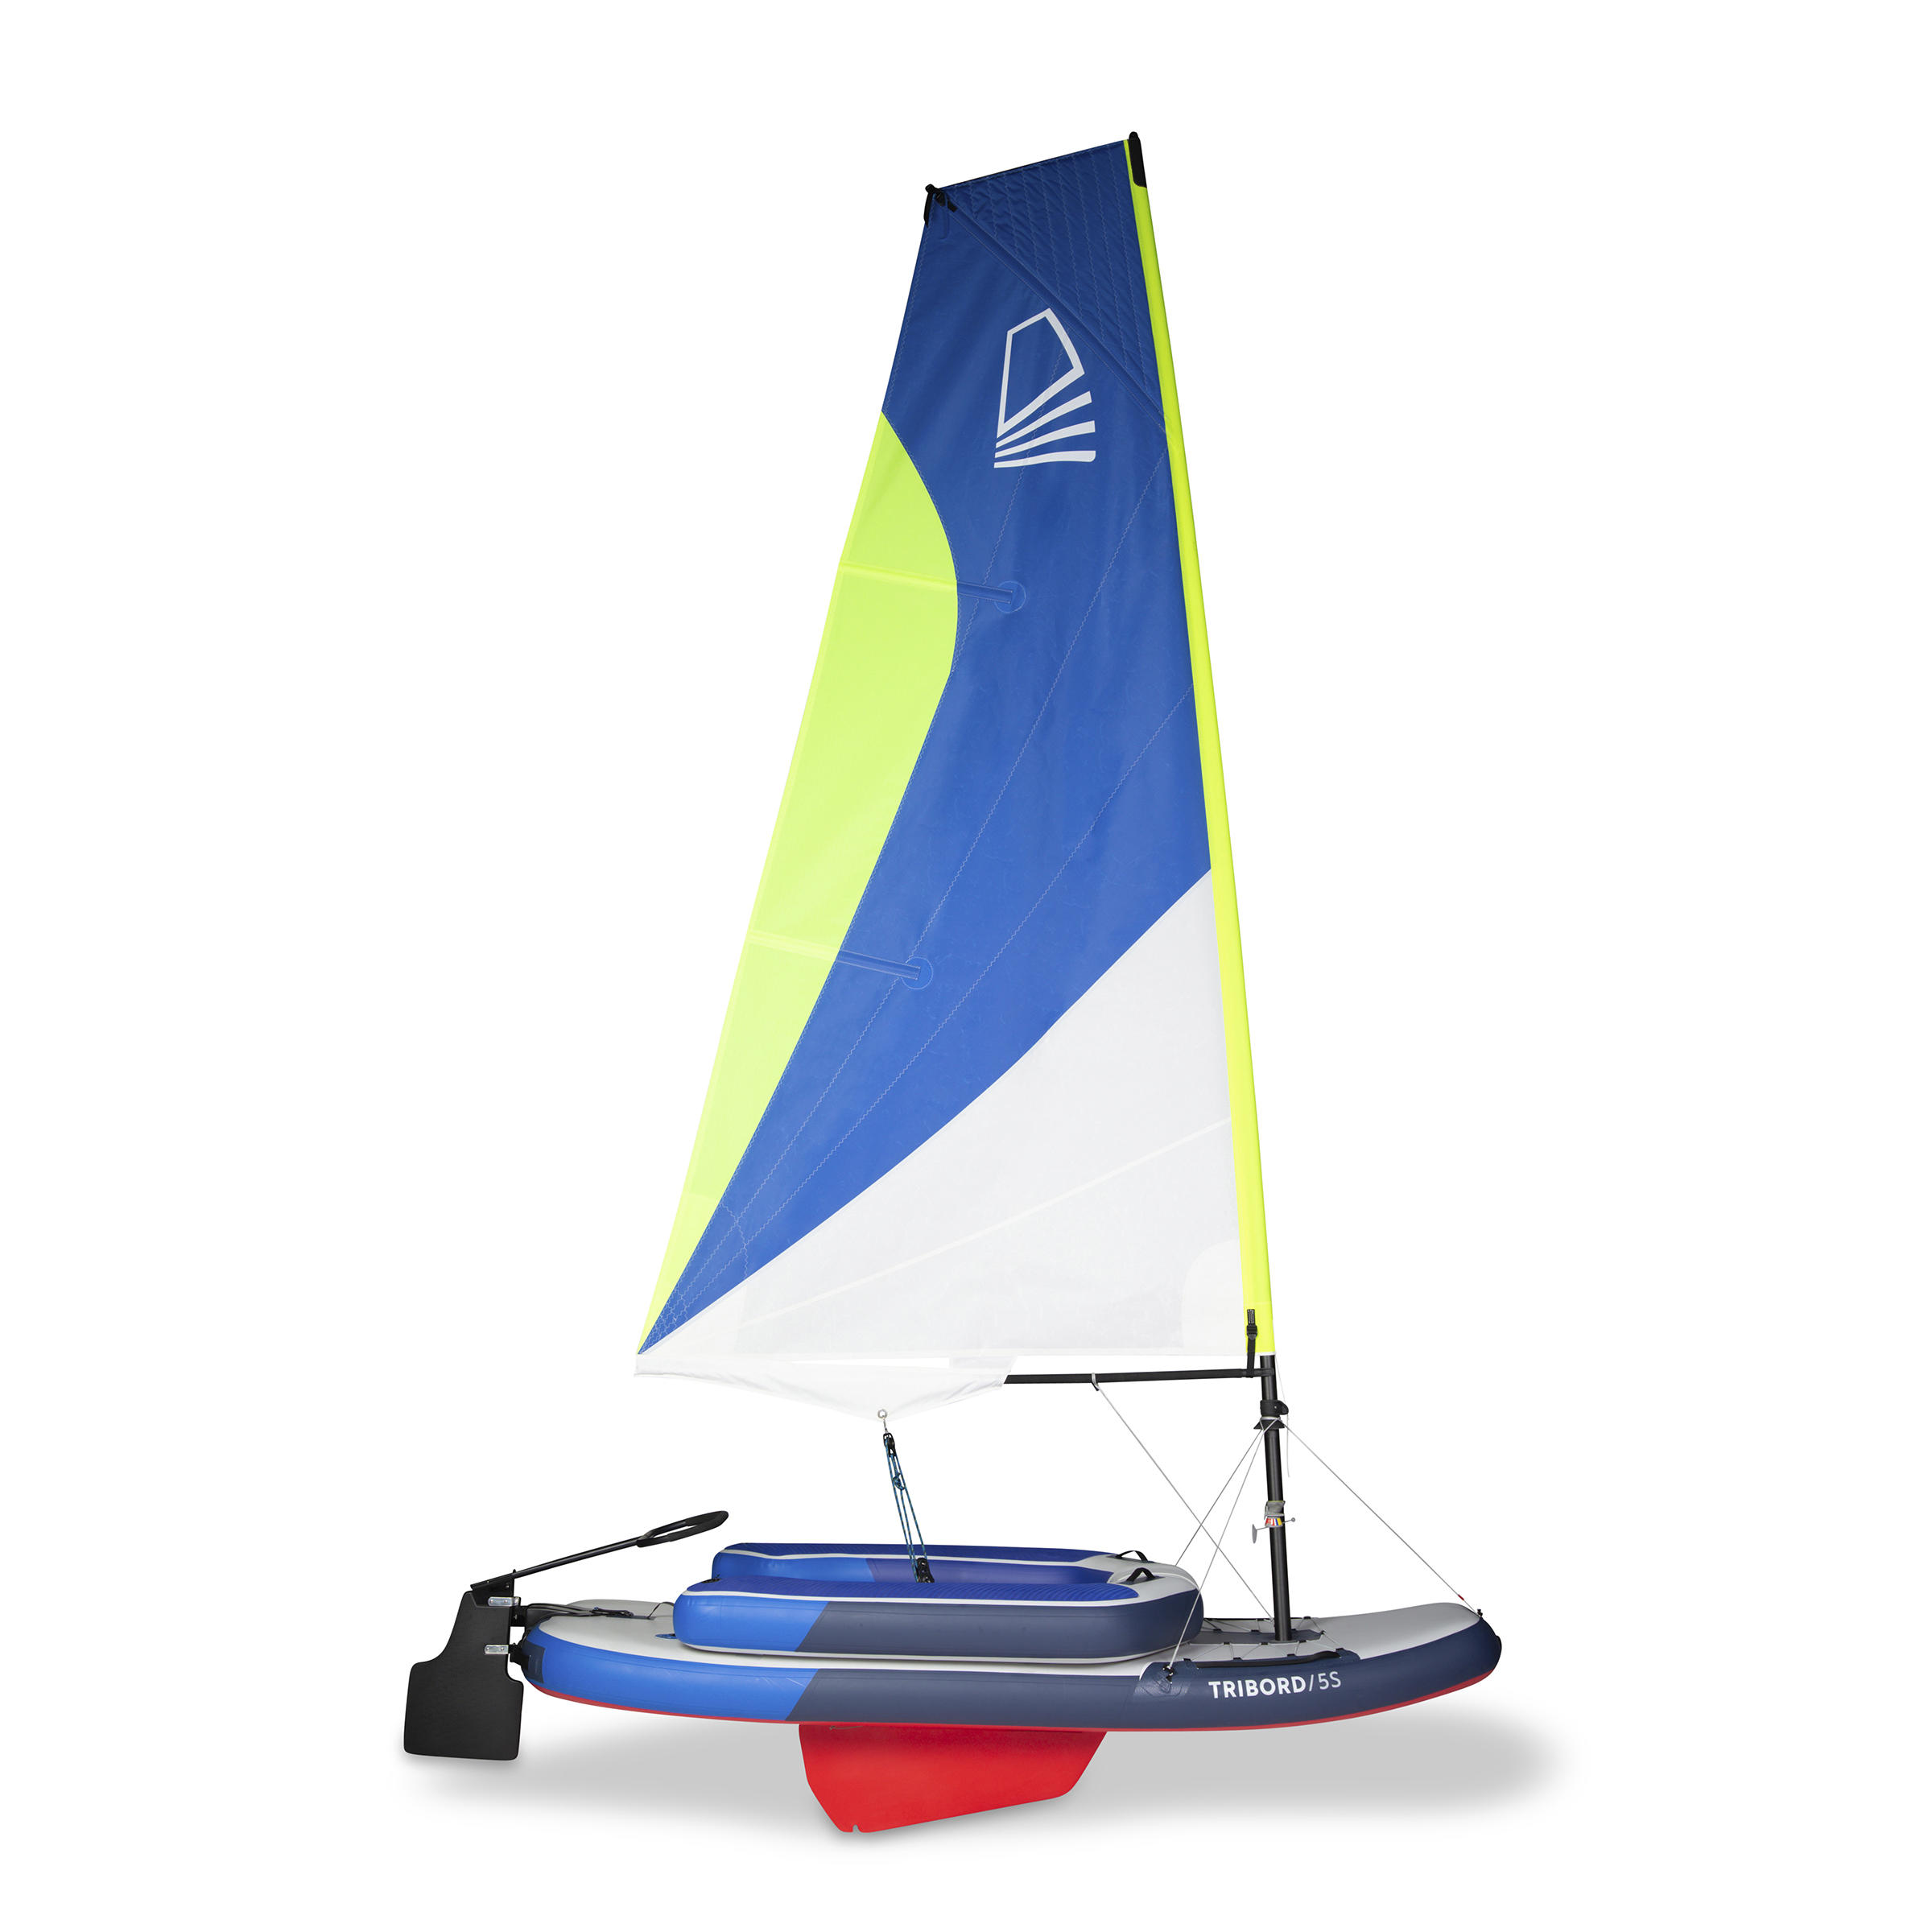 Tribord 5S Inflatable Dinghy Sailing 